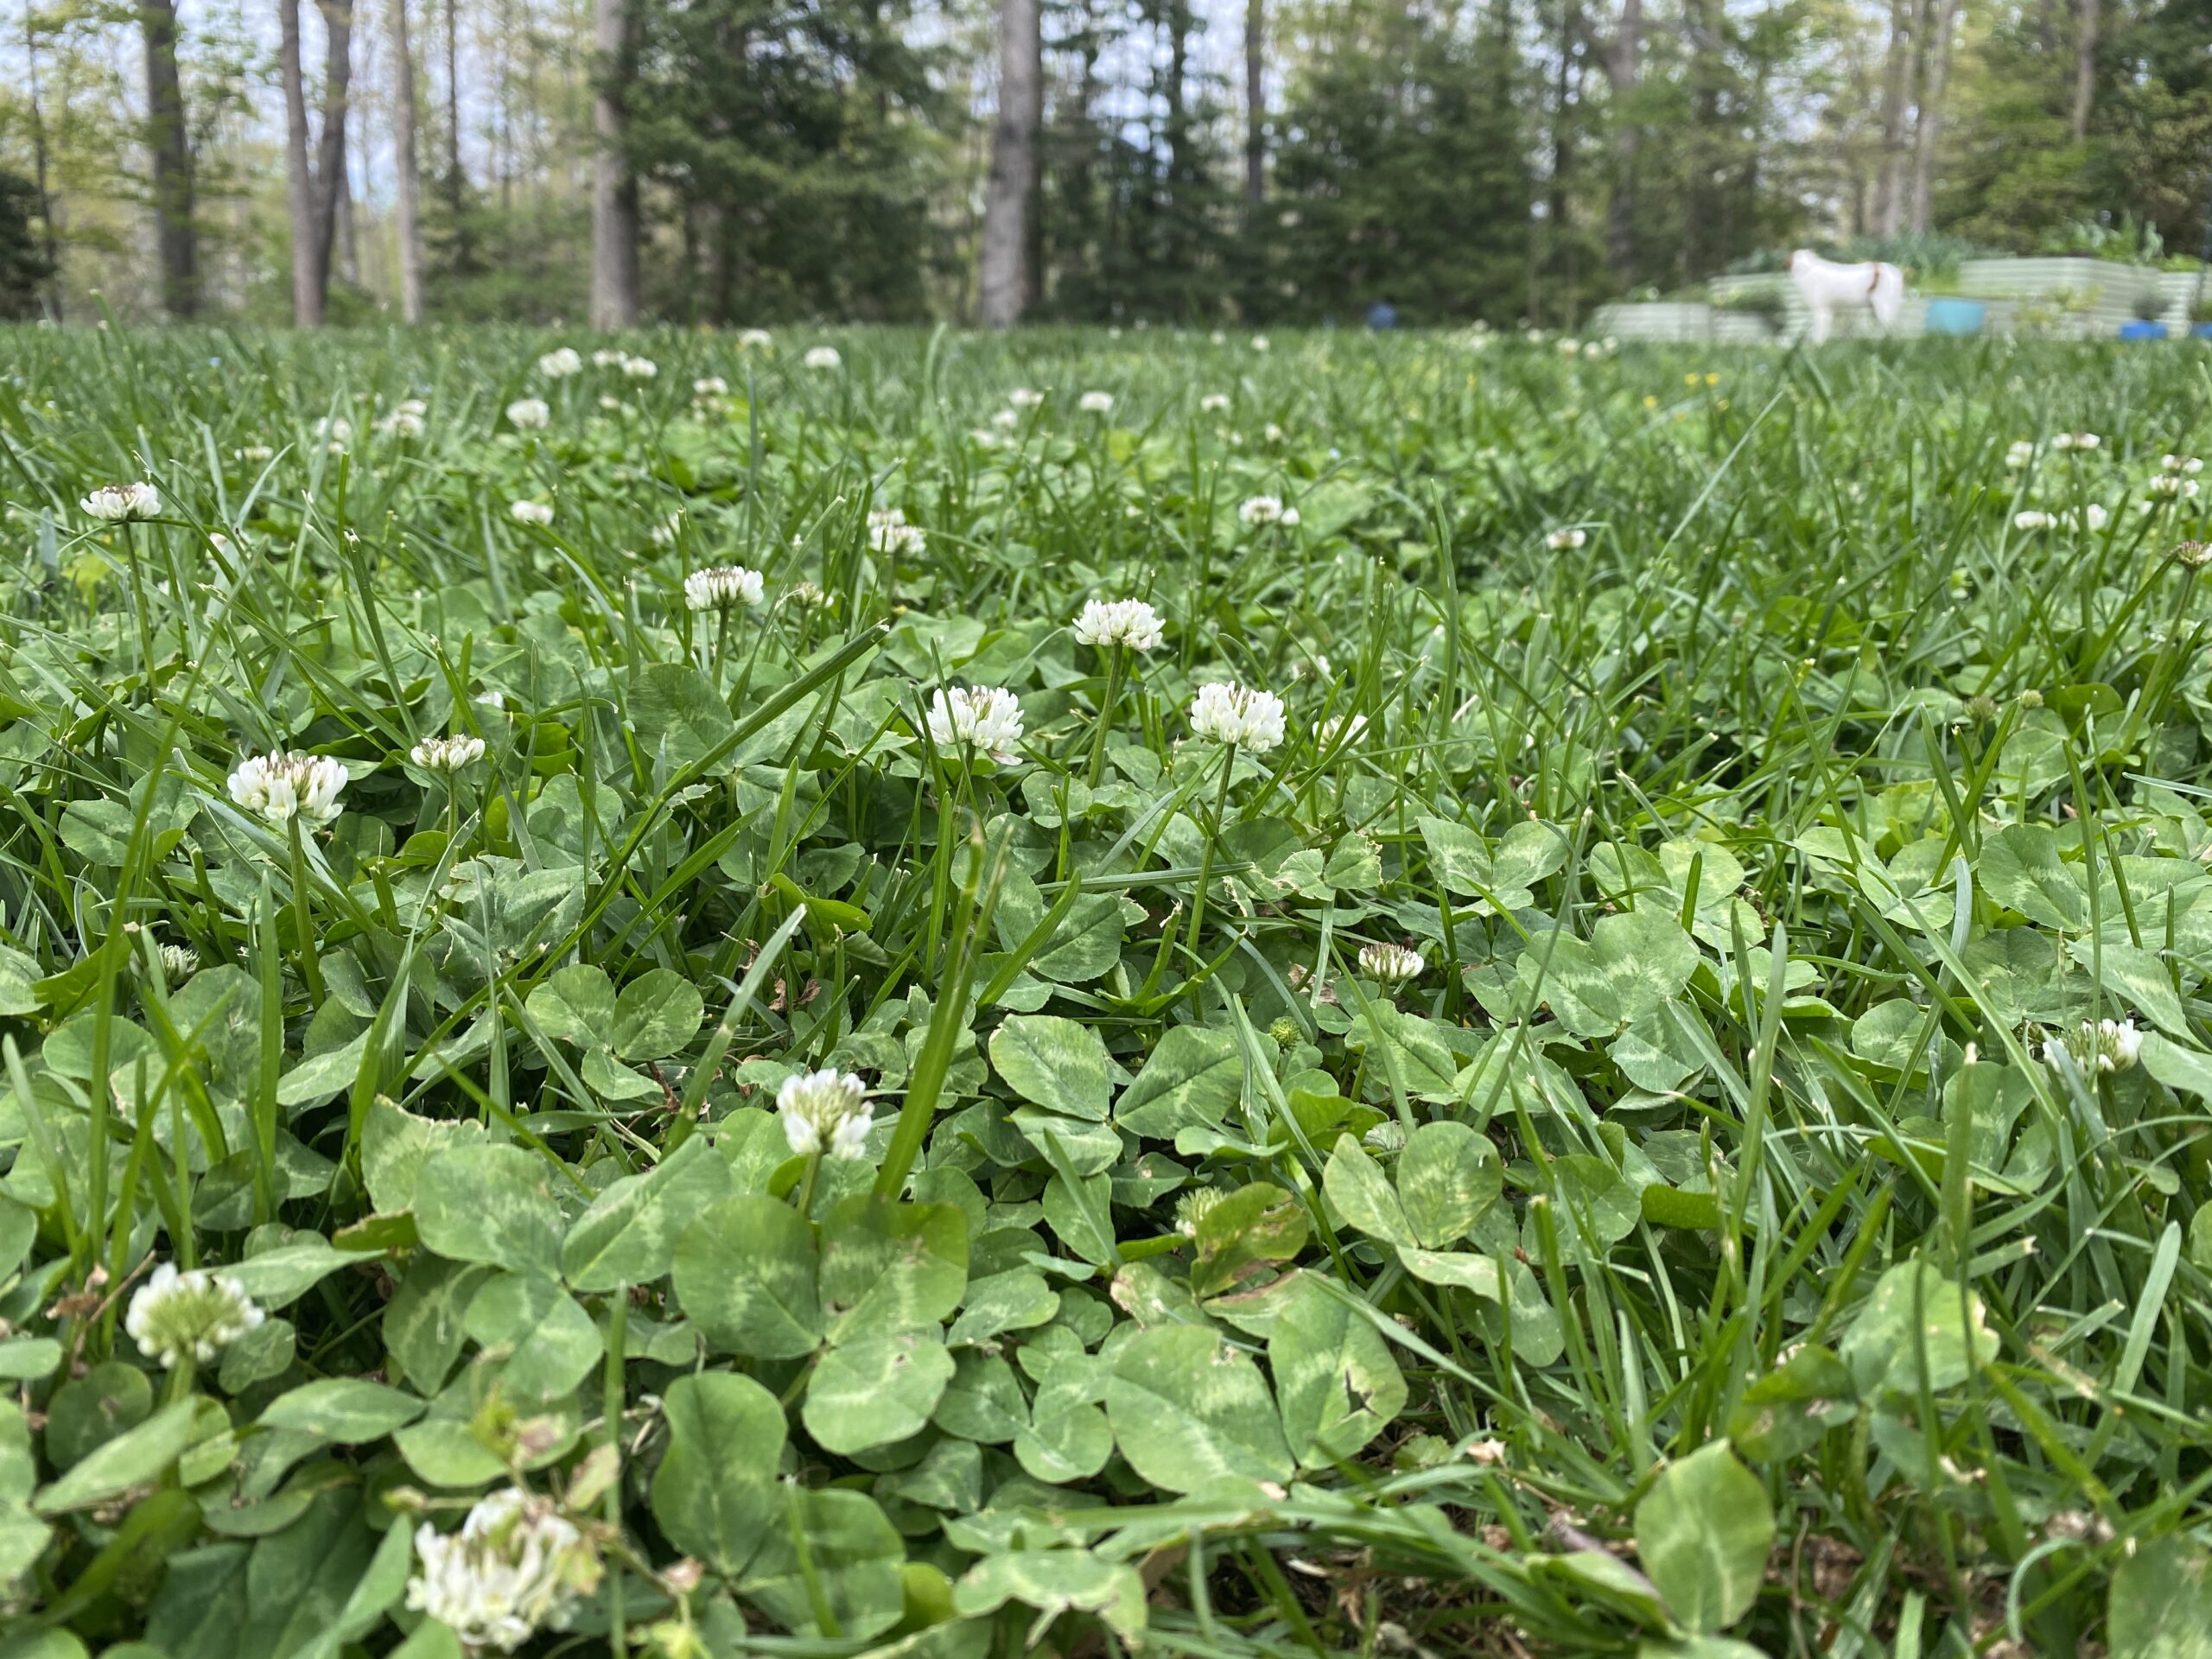 The clover in my backyard feeds pollinators and fixes nitrogen. 